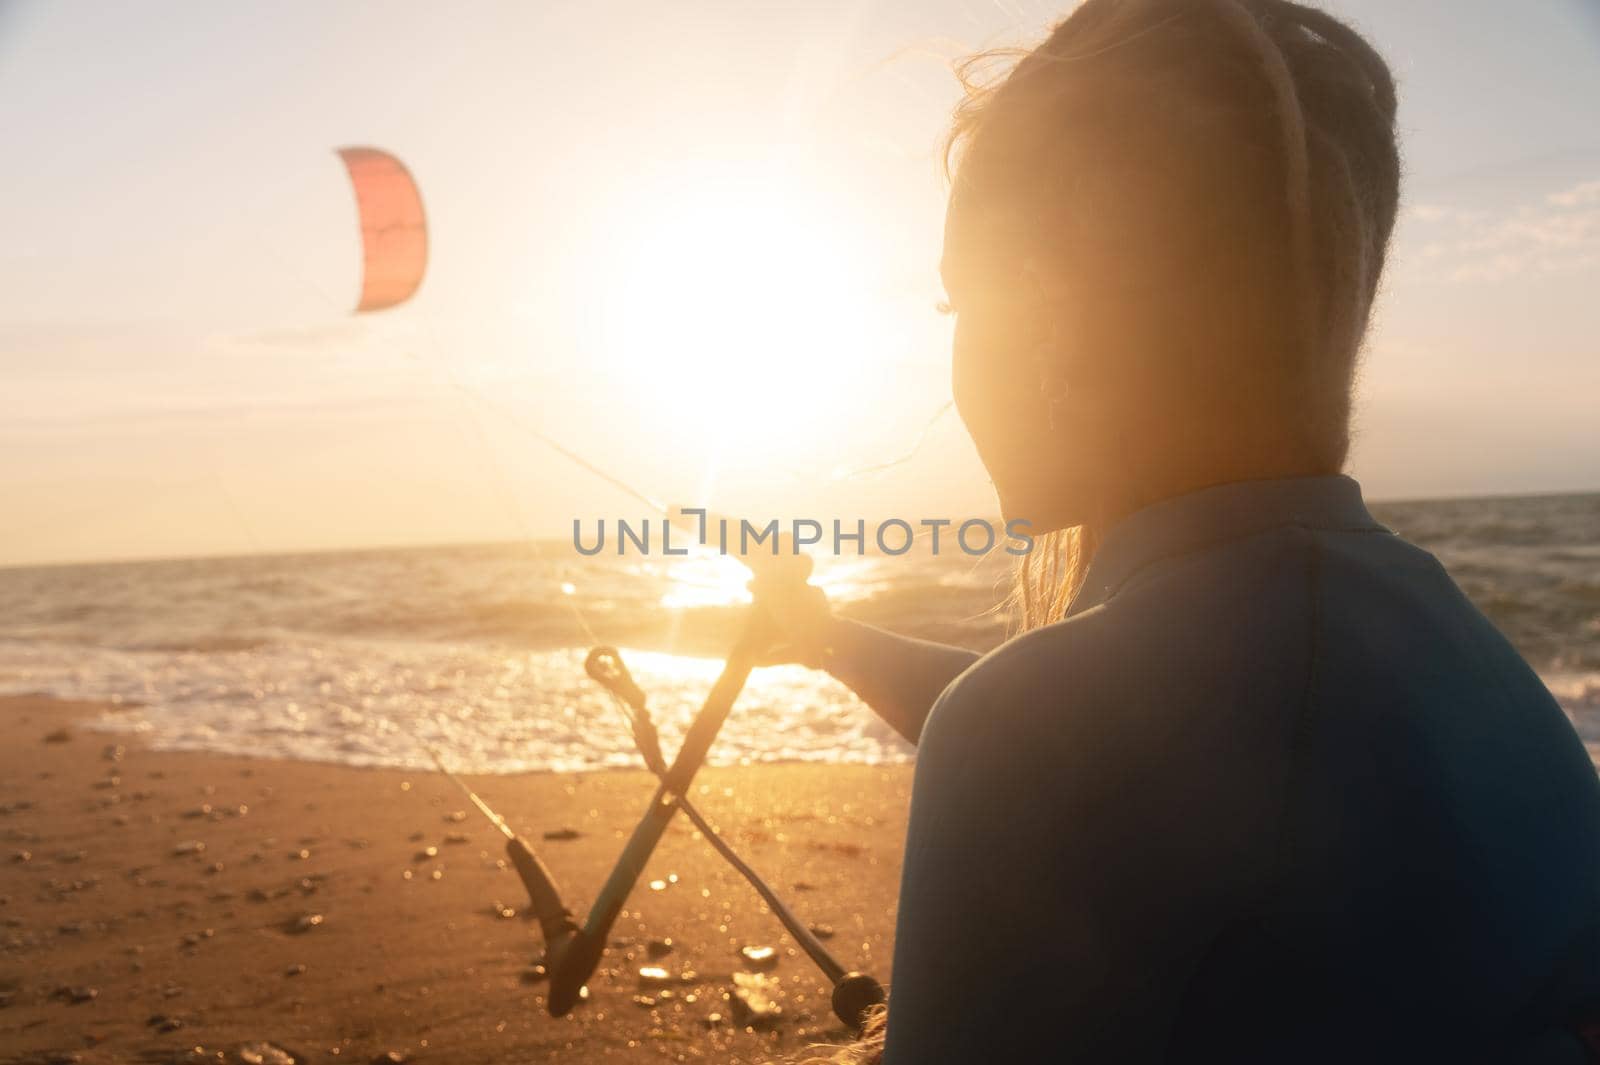 Sportswoman woman kitesurfer holds her kite over the surface of the sea with waves at sunset. Space to copy water sports. Kitesurf instructor looking at the setting sun and kite.